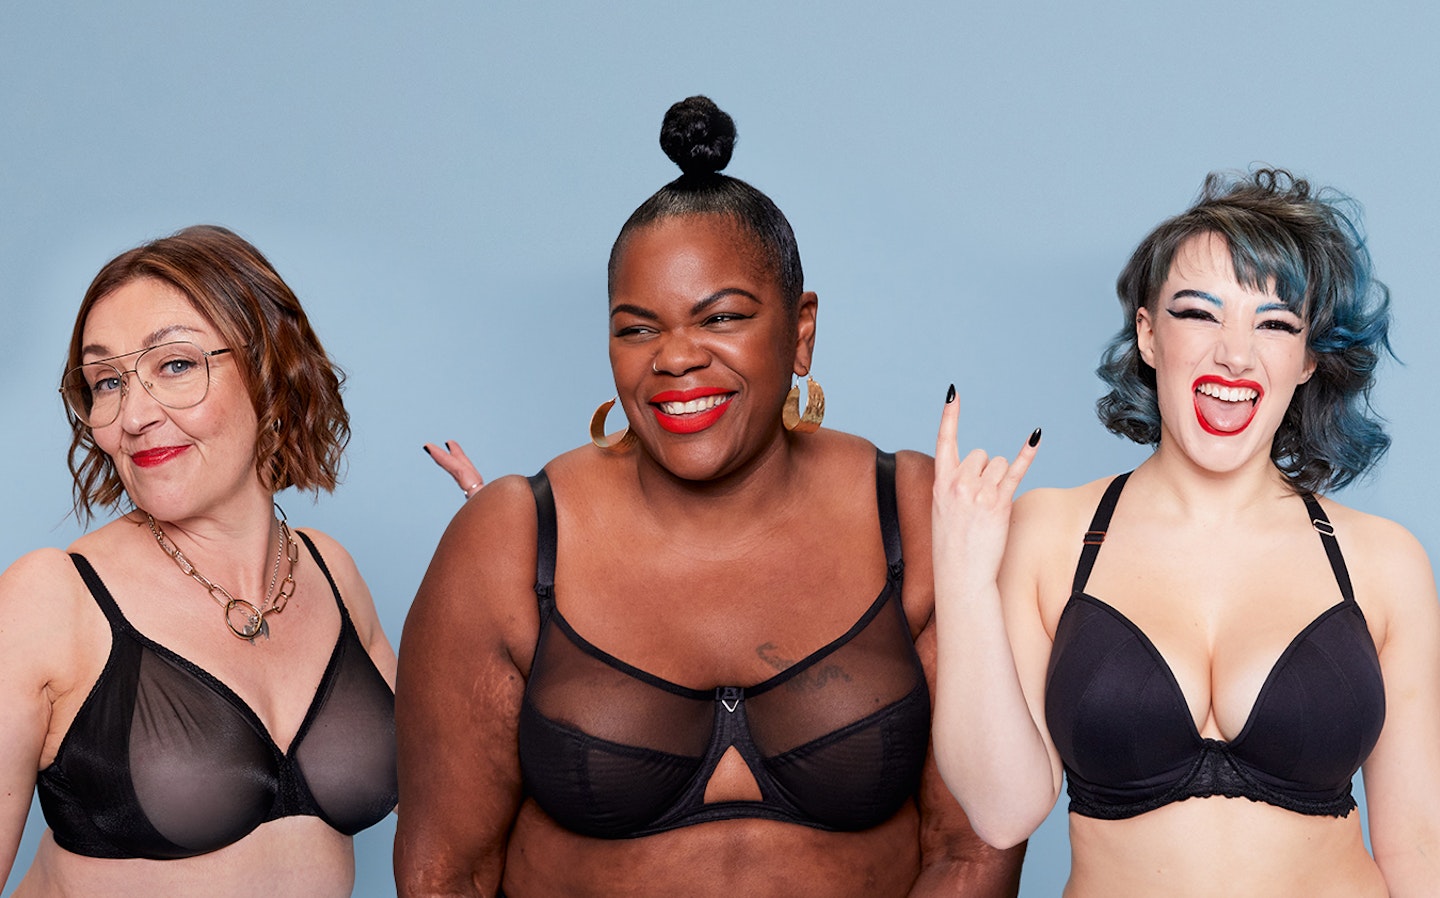 Bravissimo - It's our aim to see you feeling uplifted, support and  confident all summer long! That's why our swimwear is bra-sized and is made  to mix & match giving you full